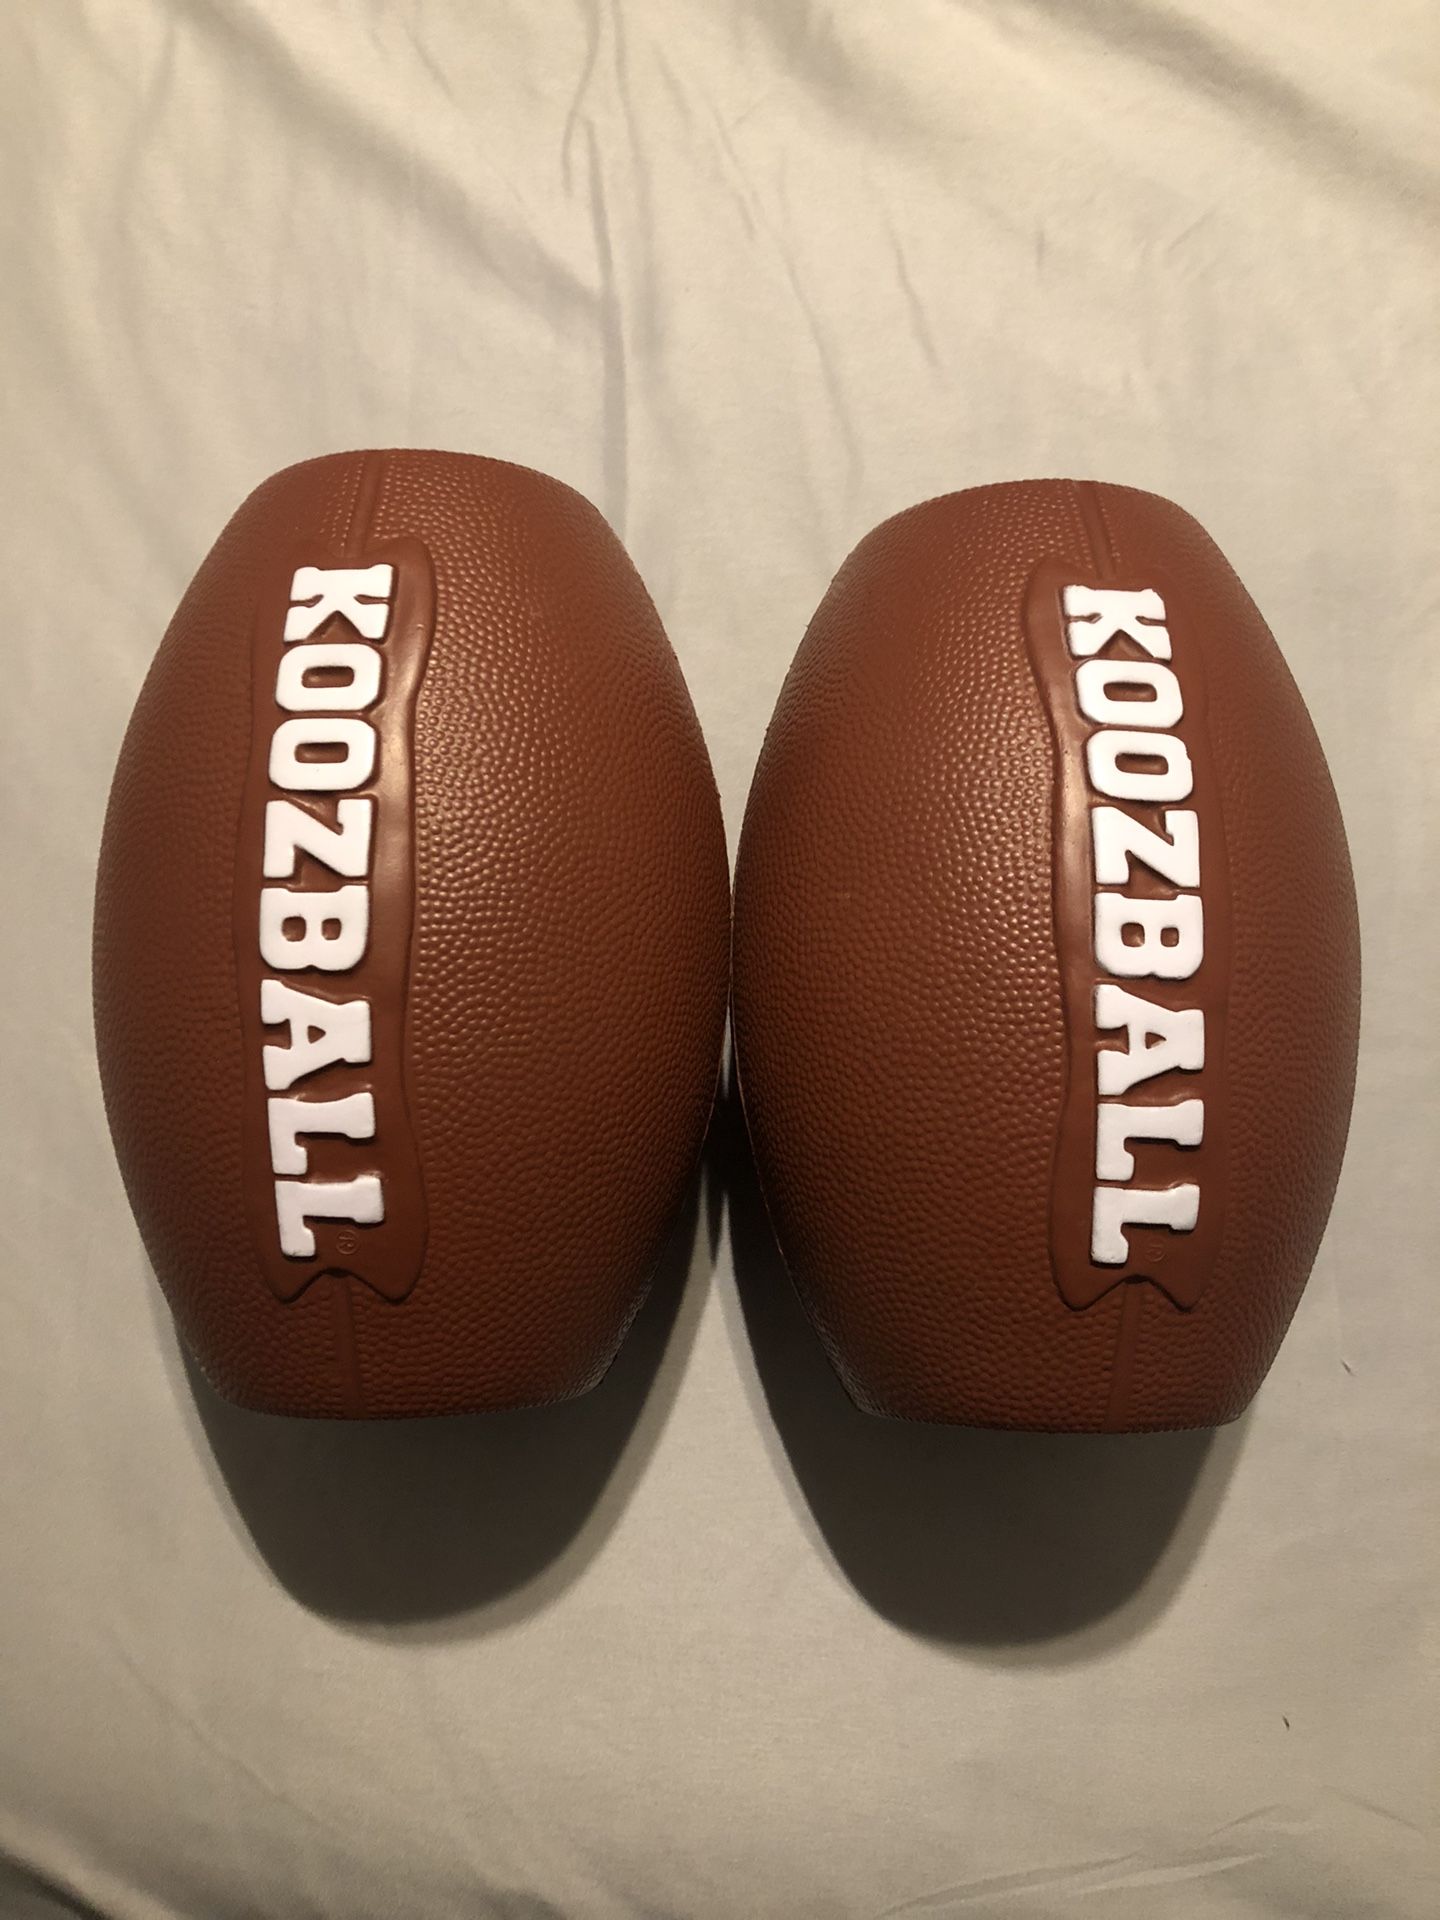 Koozball Can And Or Bottle Coolers - Set Of 2